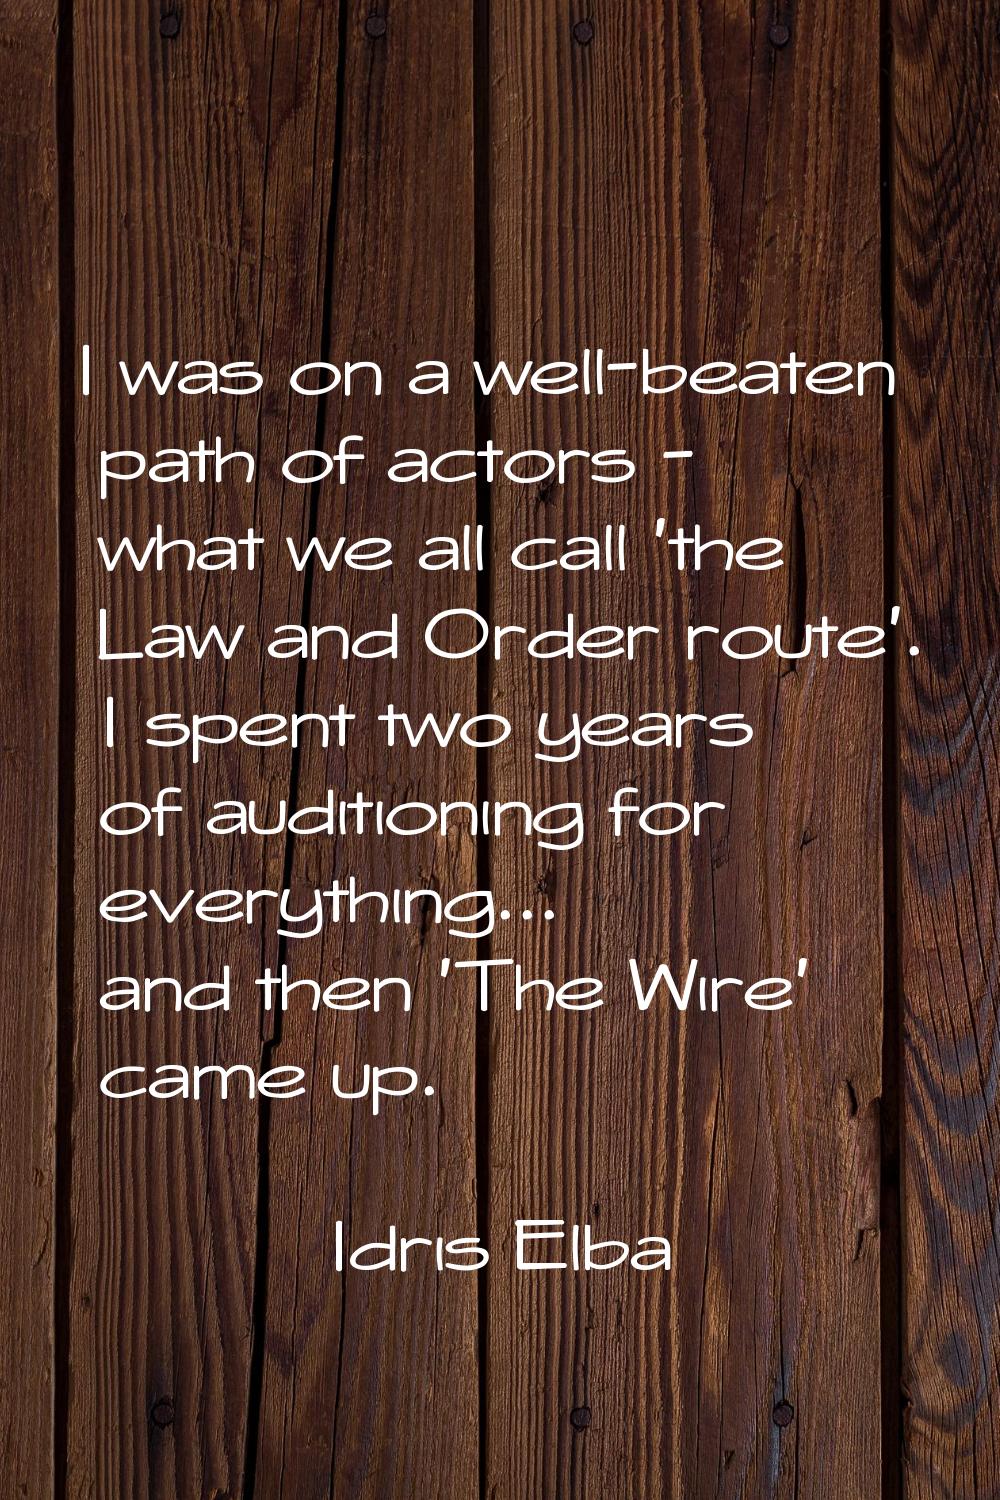 I was on a well-beaten path of actors - what we all call 'the Law and Order route'. I spent two yea